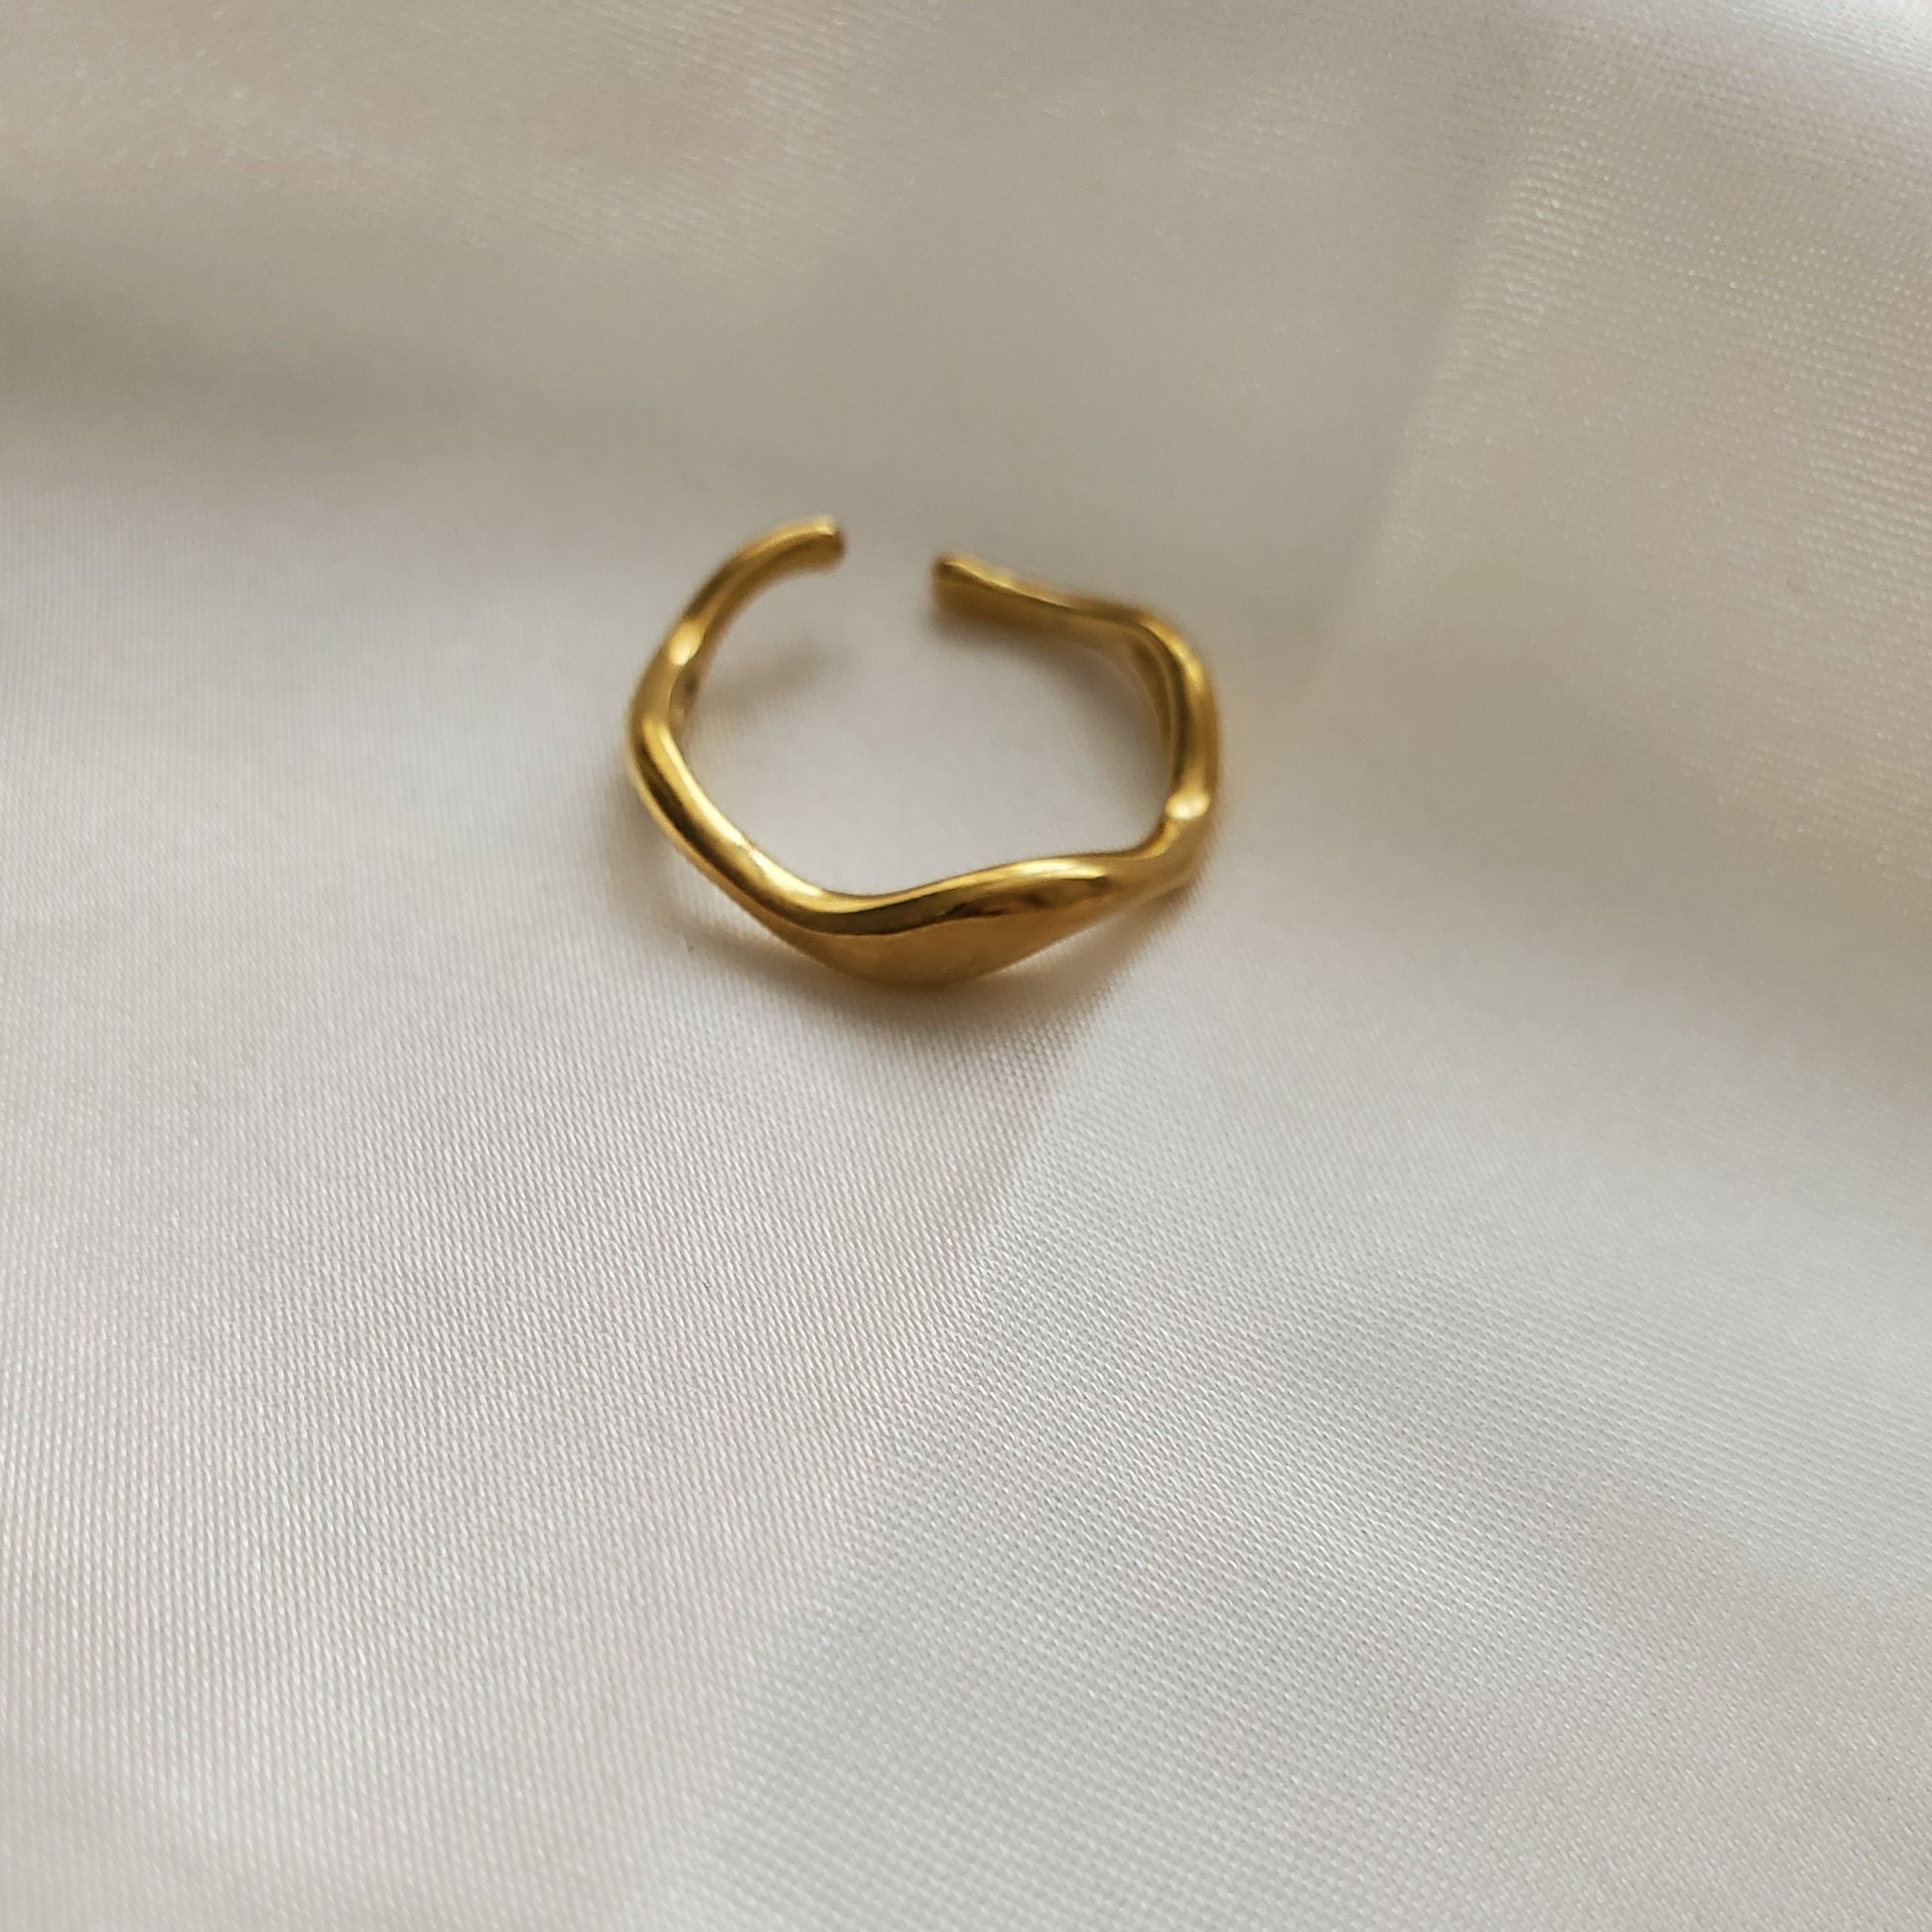 Water resistance jewelry, Hypoallergenic jewelry, does not tarnish jewelry, Gold Plated Necklaces, Vintage Necklace, Minimalist Jewelry, Hello Luxy, Fine Jewelry, Tik Tok Jewelry, Tik Tok Fashion, Best Gift for wife, Wife best gift, stackable gold ring, simple gold ring, lightweight gold ring, classy gold ring